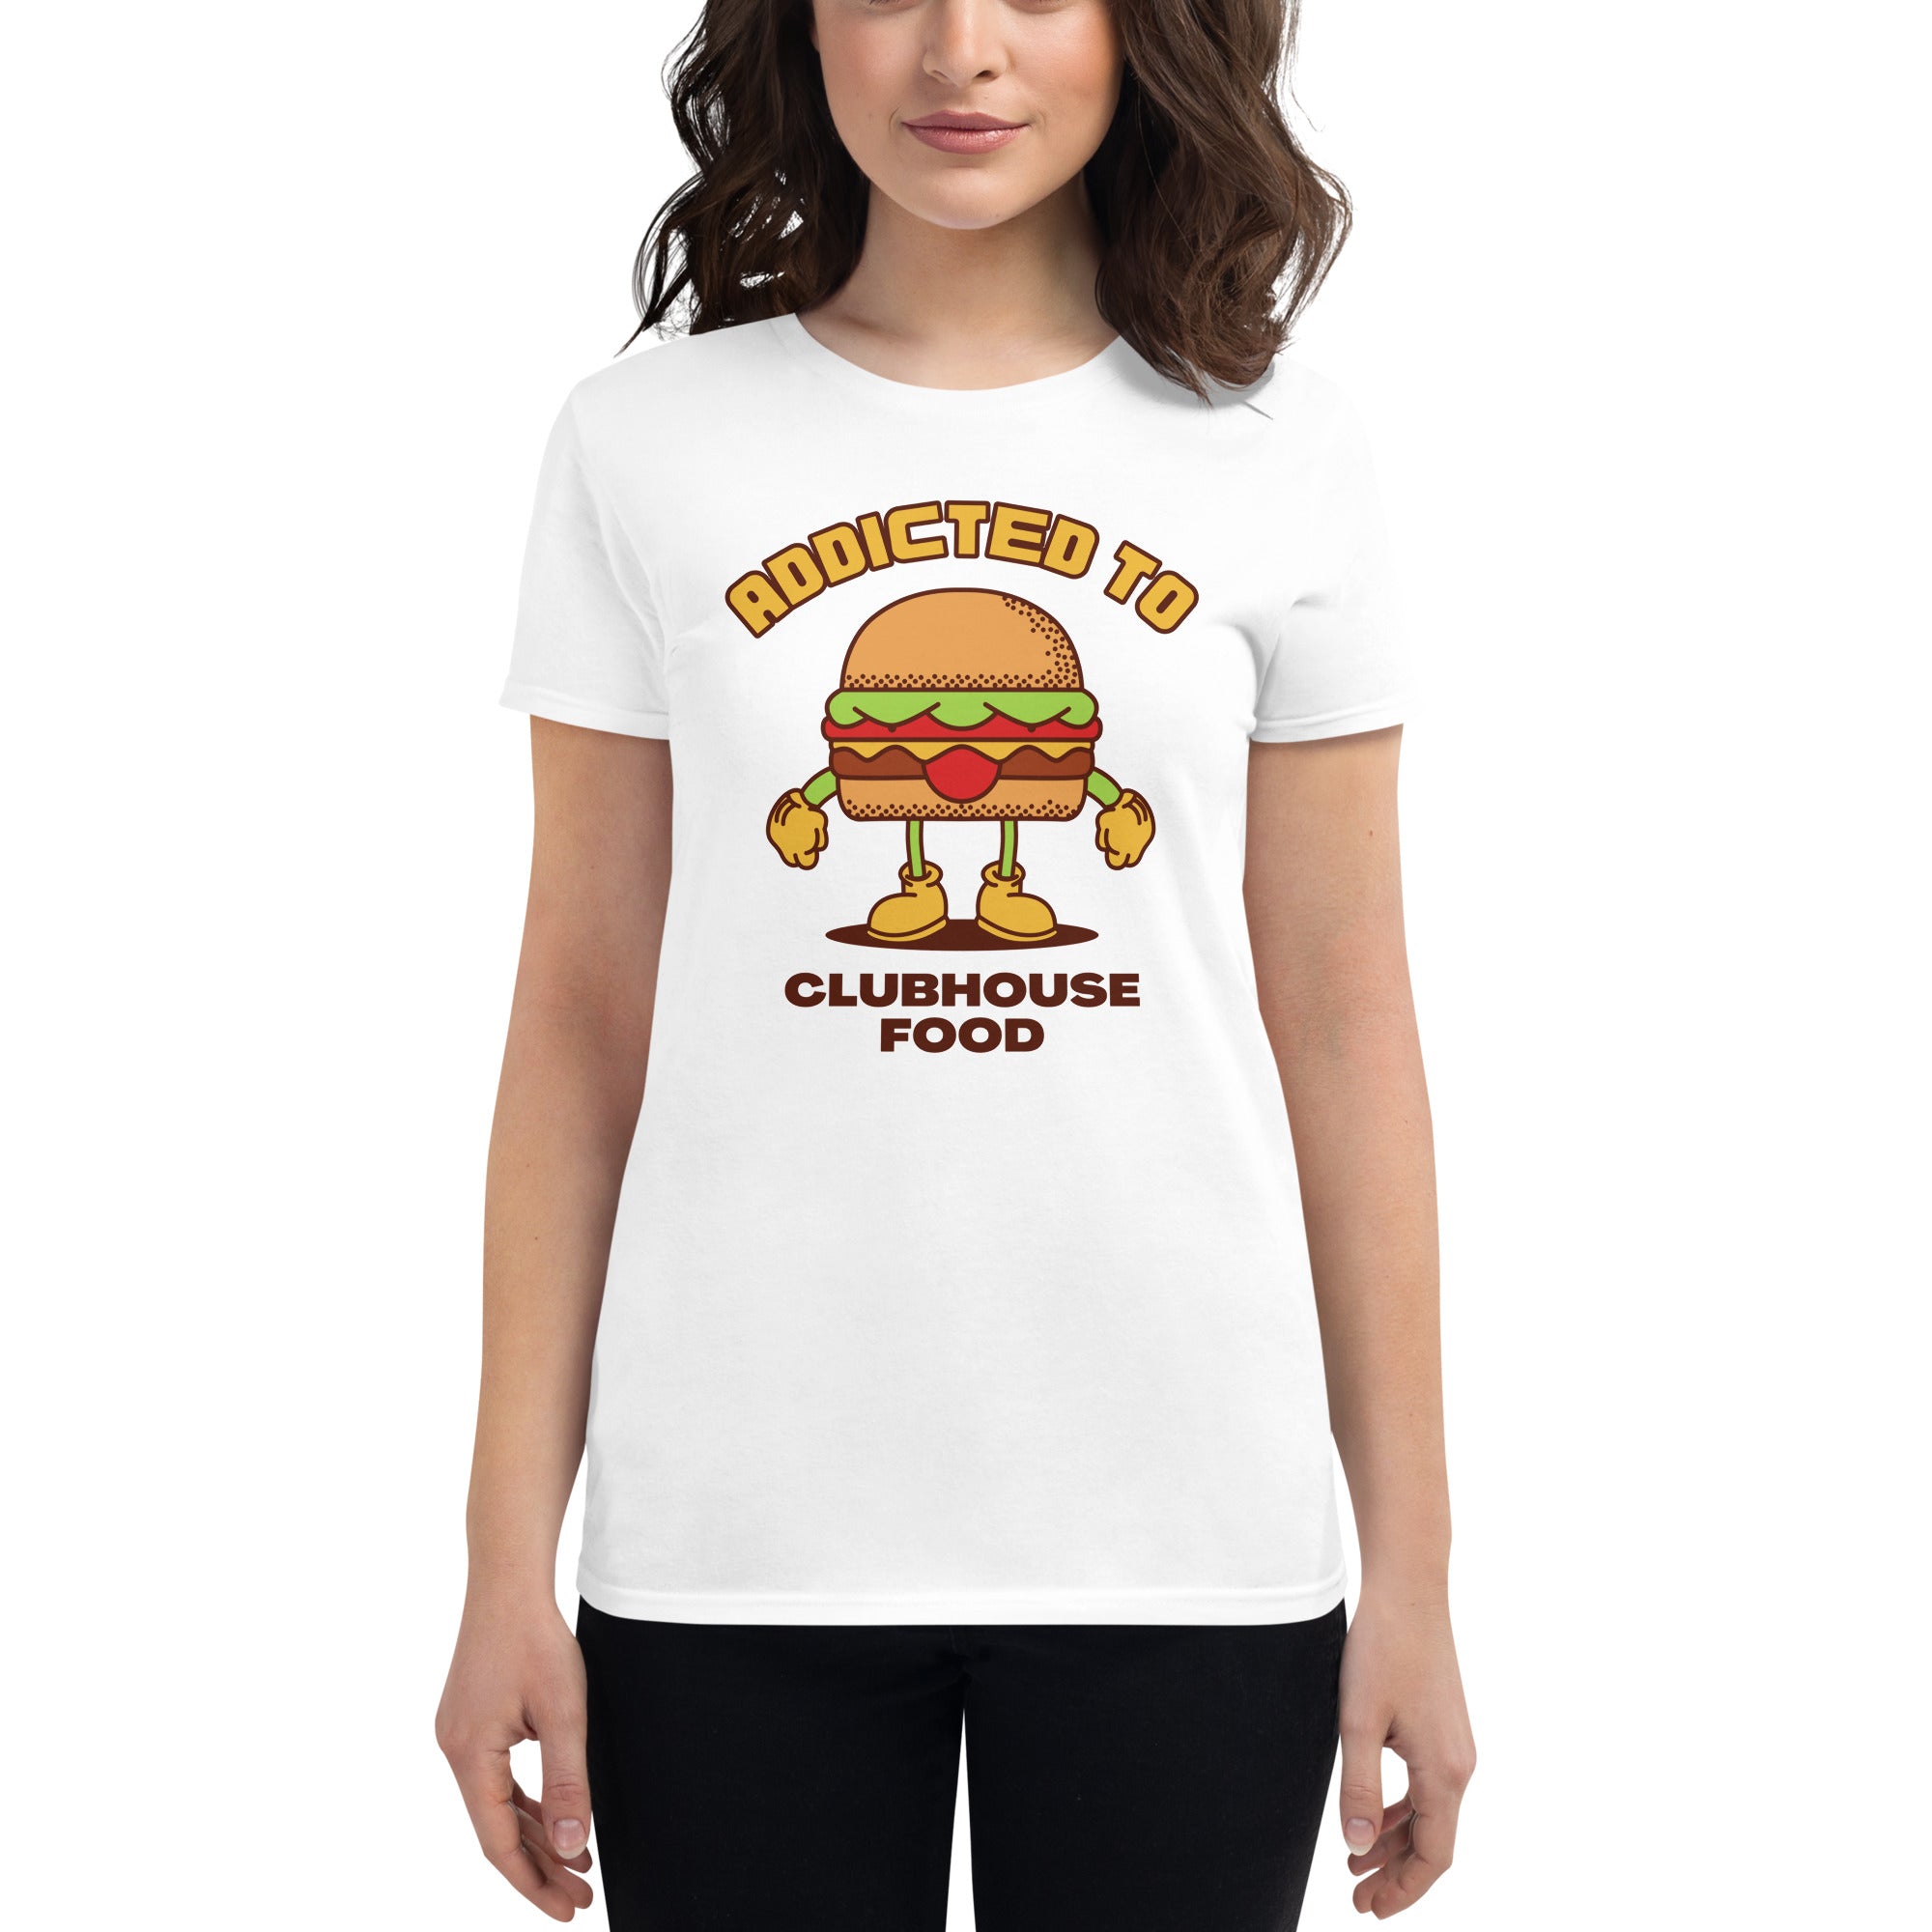 Addicted To Clubhouse Food Women's Fitted T-Shirt